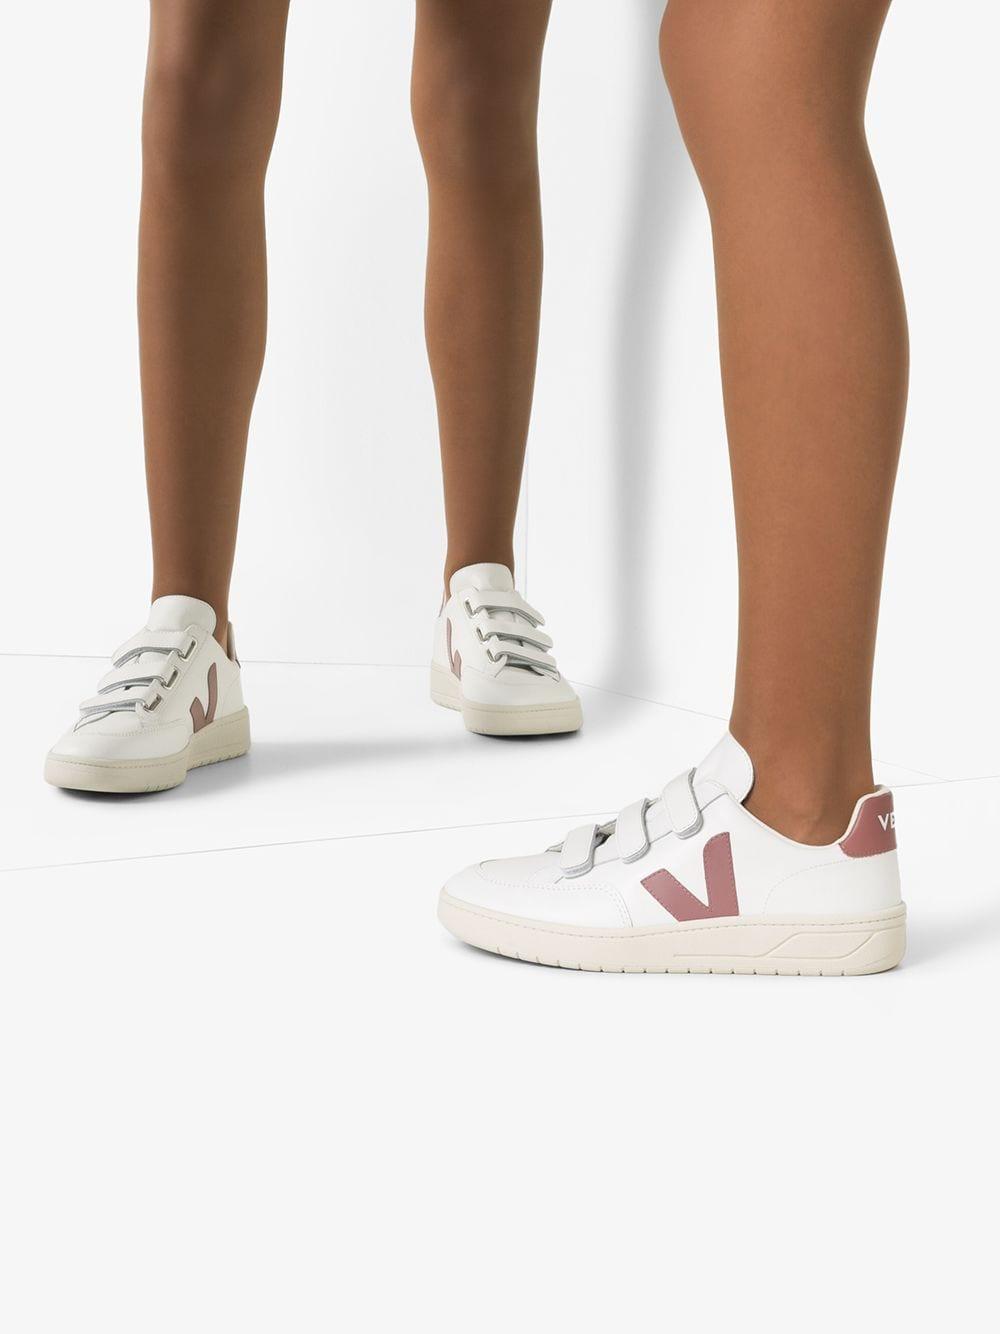 veja sneakers mit klettverschluss Quality Promotional Products &  Merchandise | Lowest Prices - Online shopping for the Latest Clothes &  Fashion - OFF-70% >Free Delivery